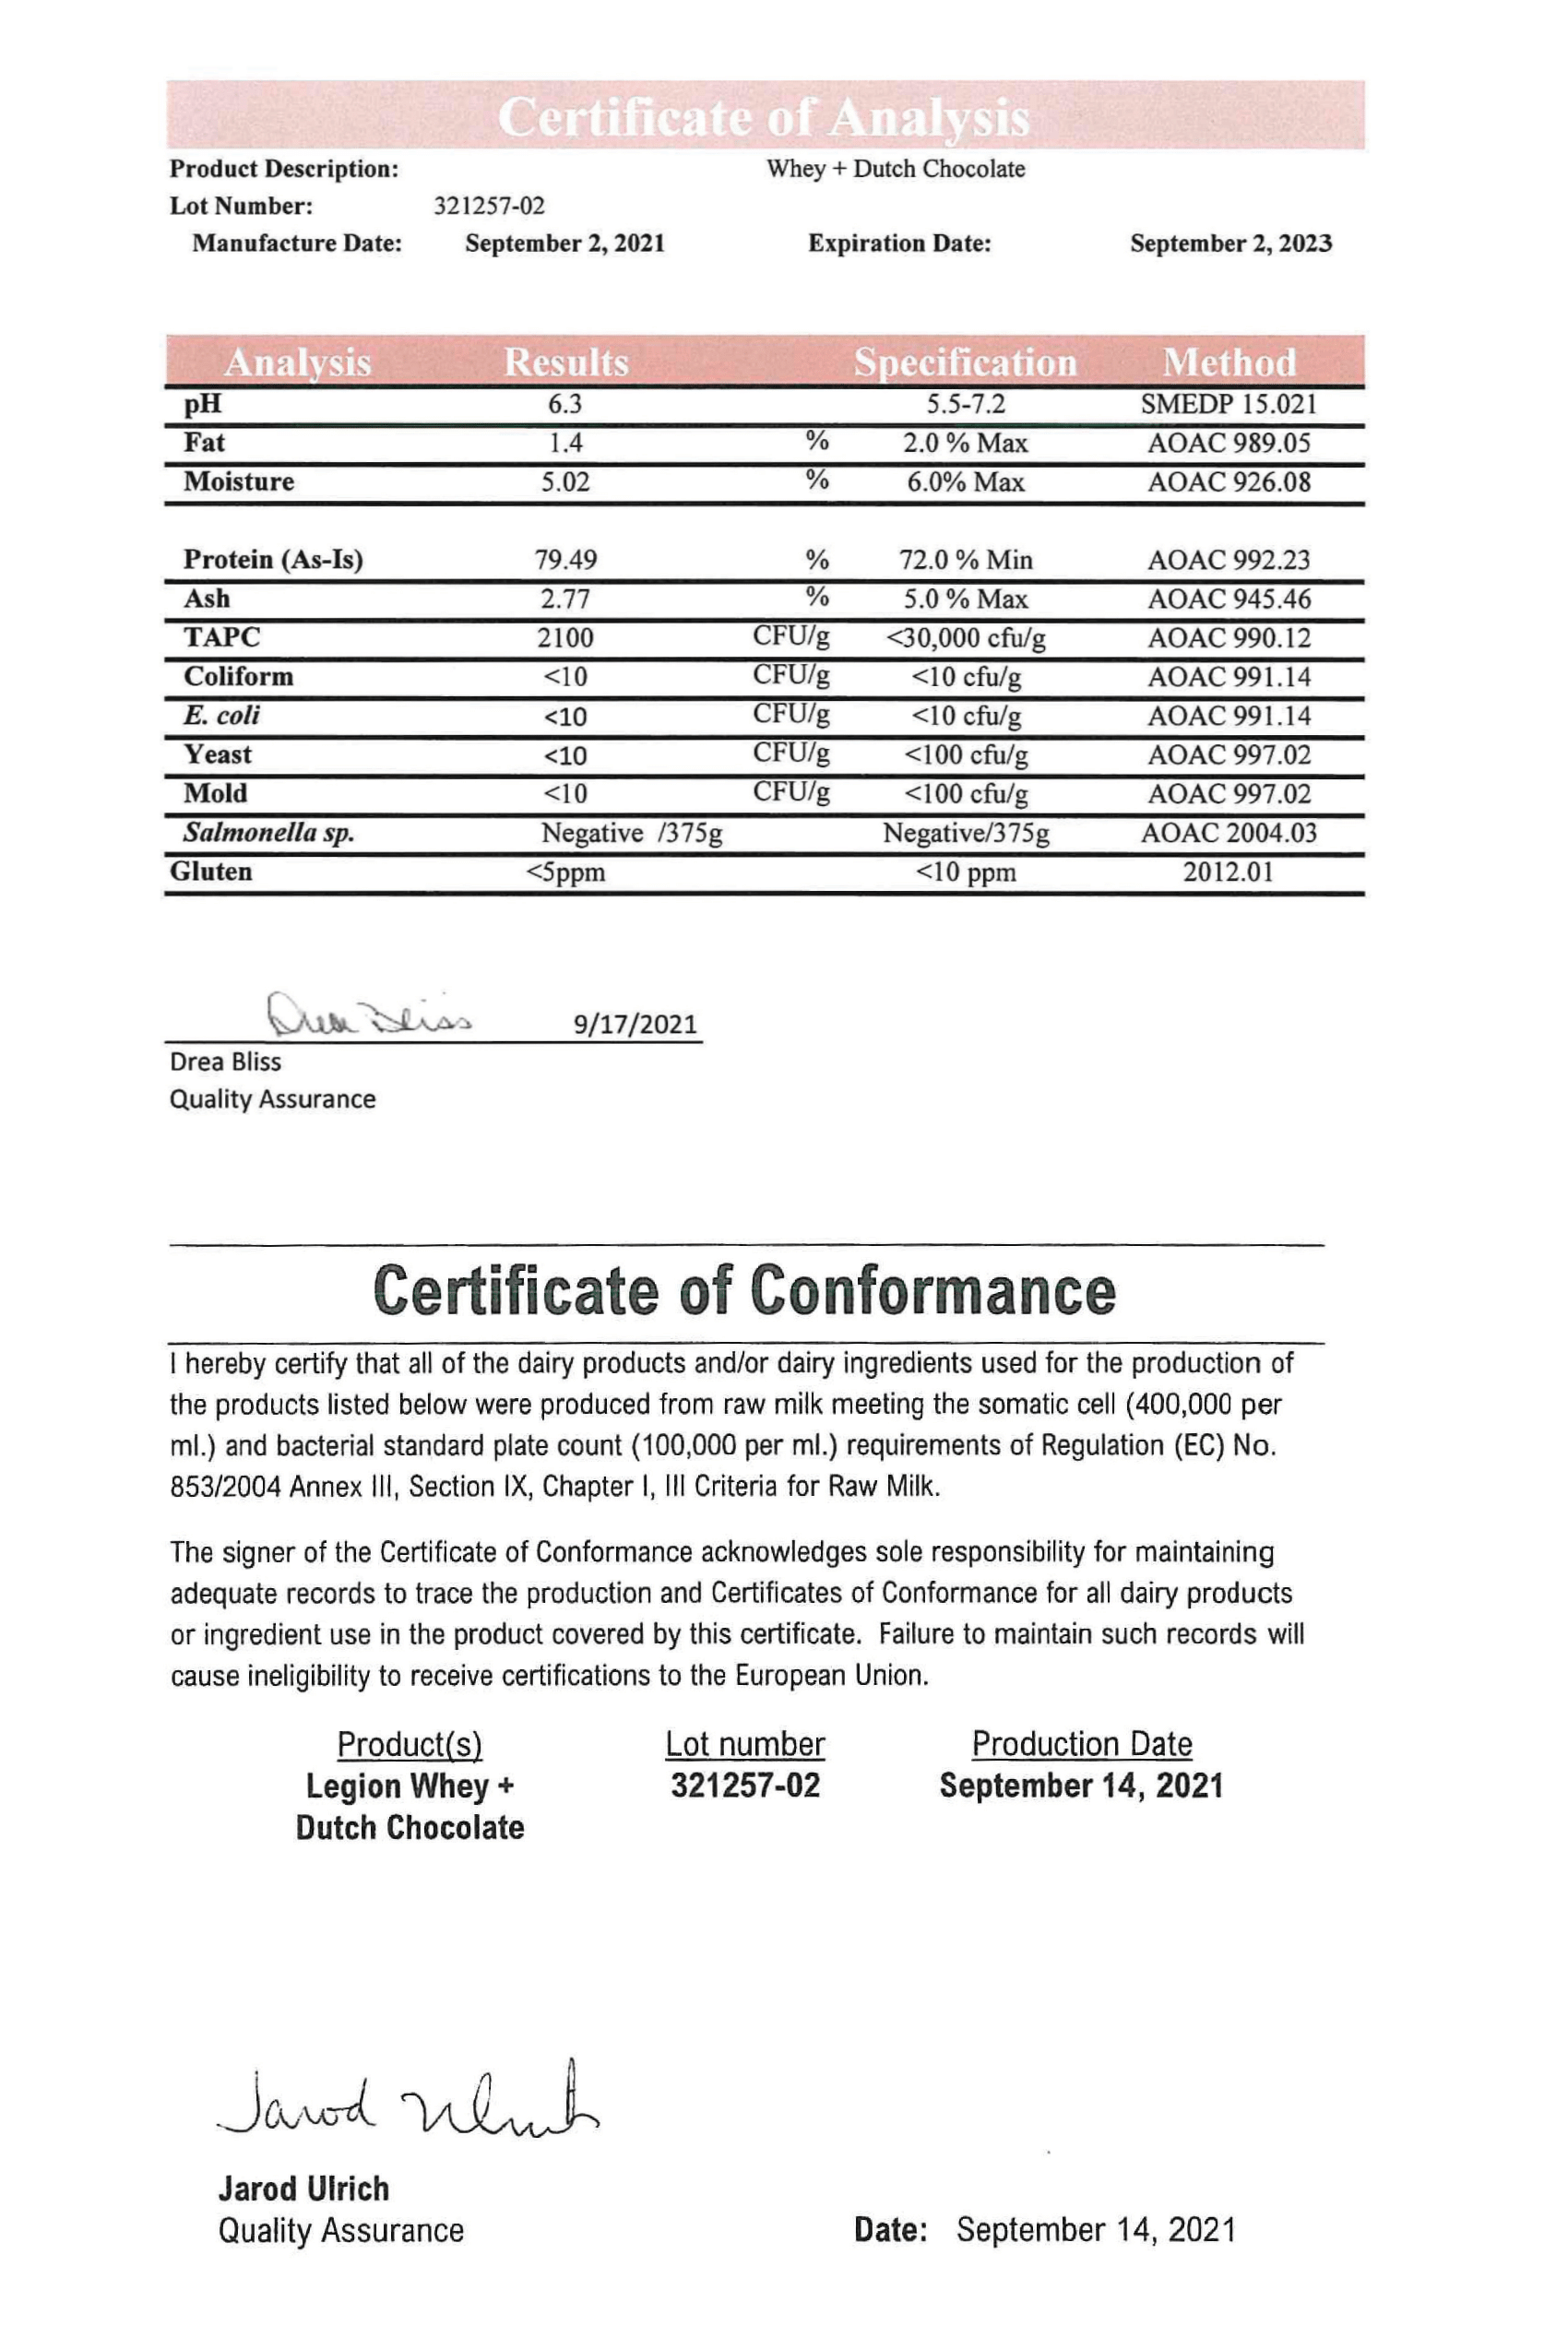 Whey+ Lab Test Certificate